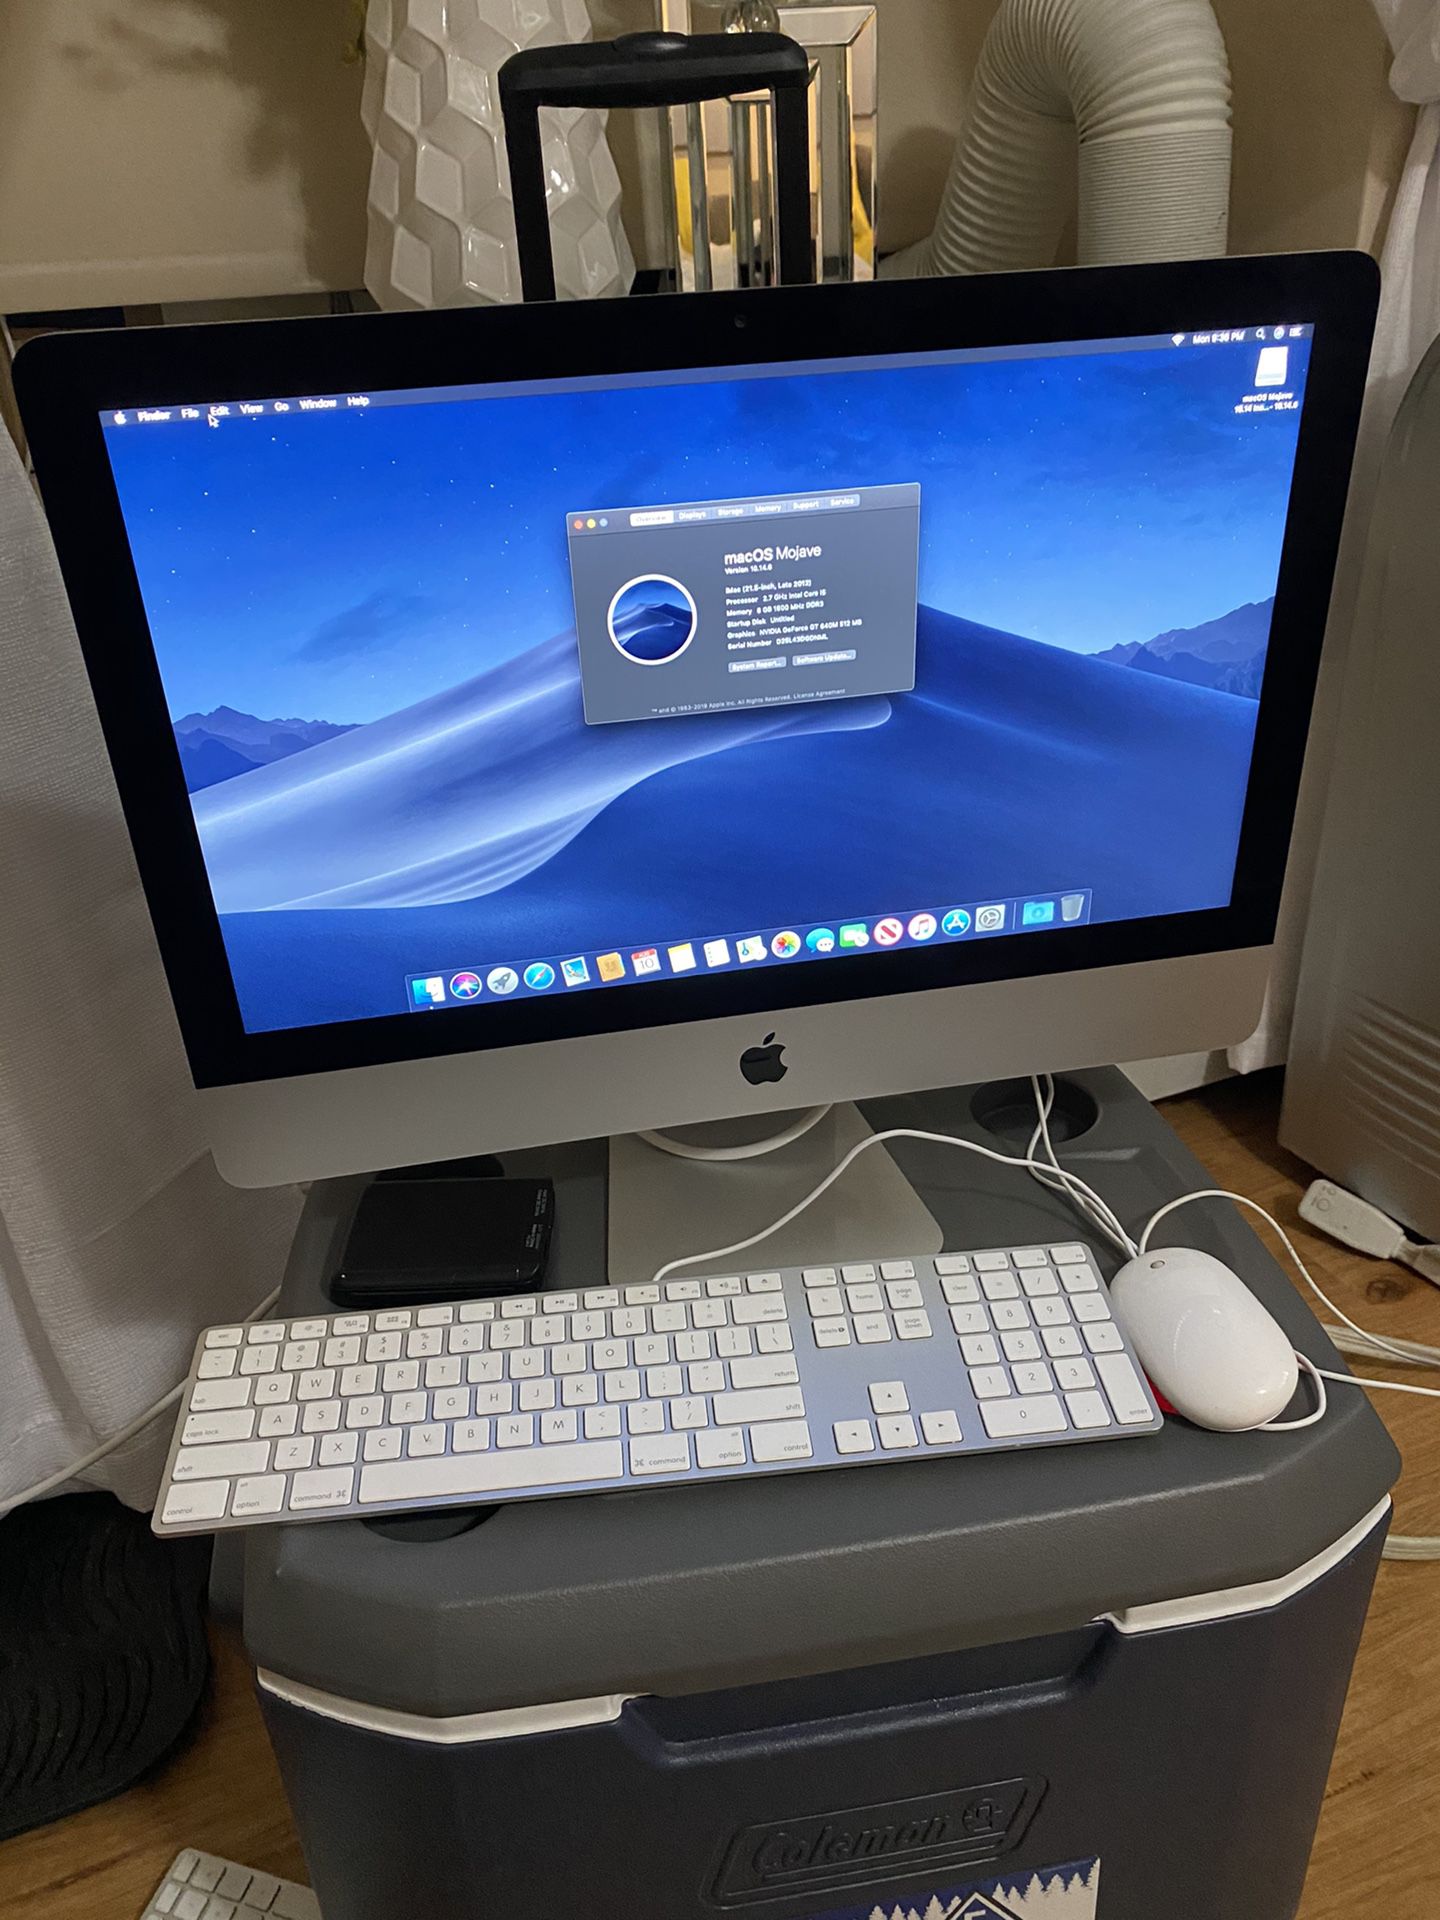 Apple imac 21.5 inch late 2012 2.7ghz 1tb hard drive 8ram new condition